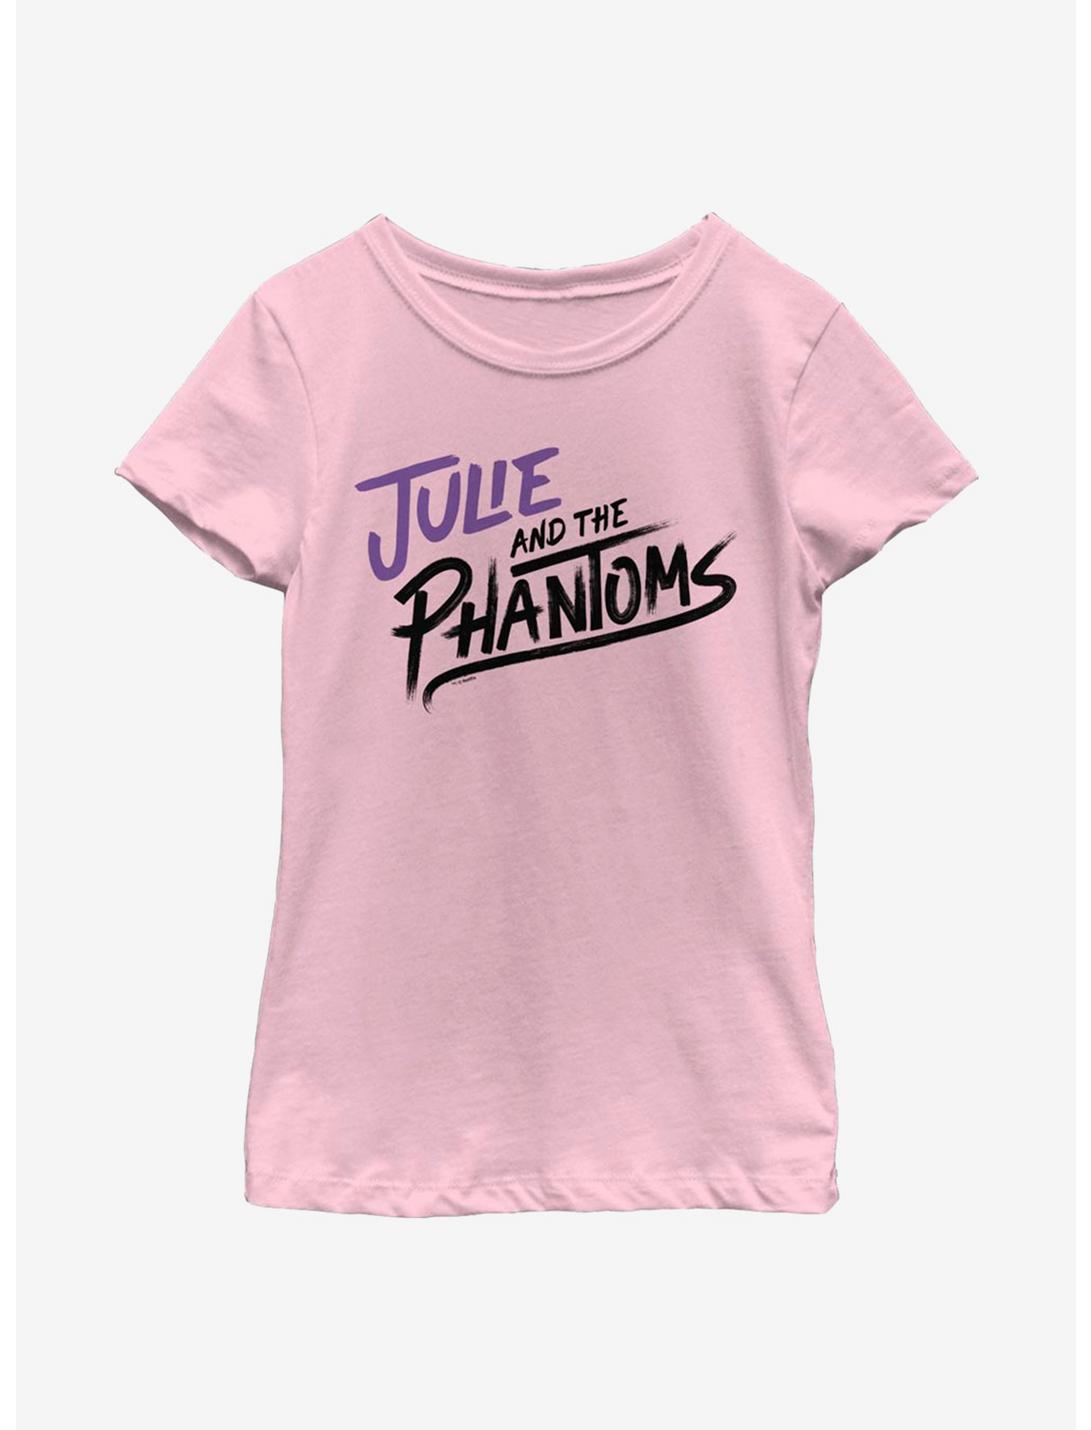 Julie And The Phantoms Stacked Logo Youth Girls T-Shirt, PINK, hi-res